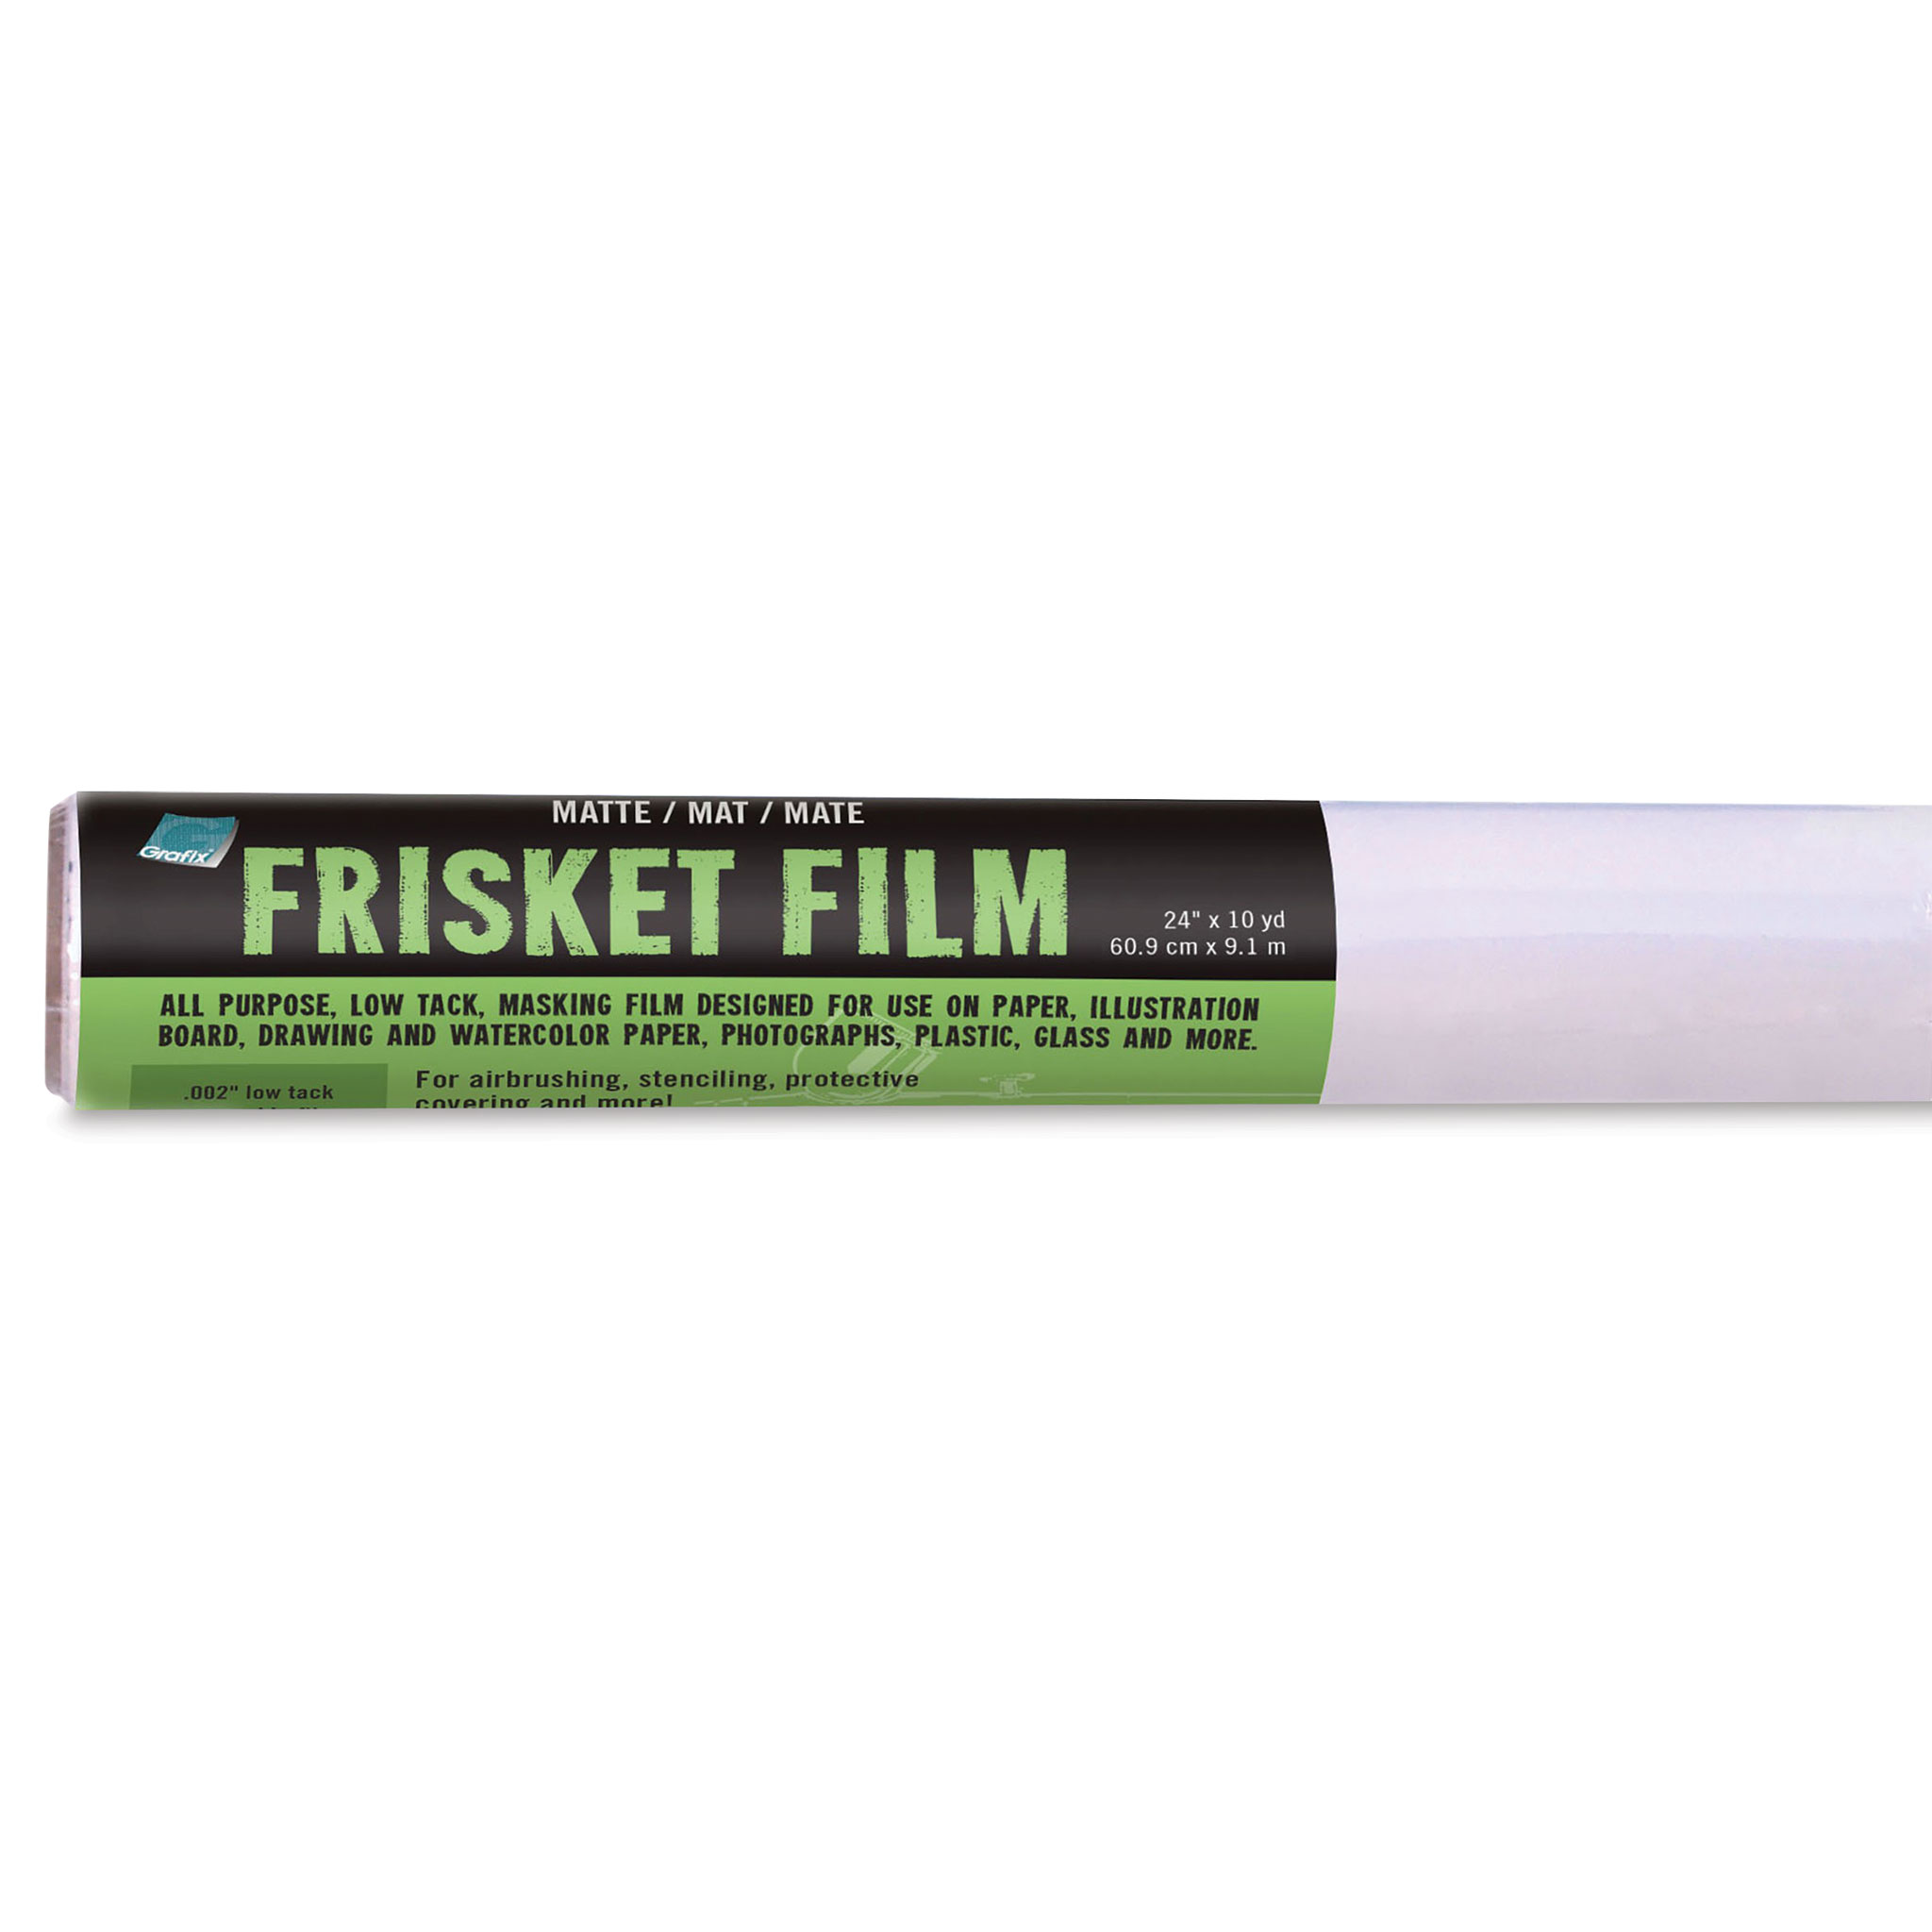  Grafix Frisket Film for Airbrushing, Retouching, Stencils,  Rubber Stamping, Watercolors, and Masking 9 x 12, Matte, 6 Pack, Extra Track